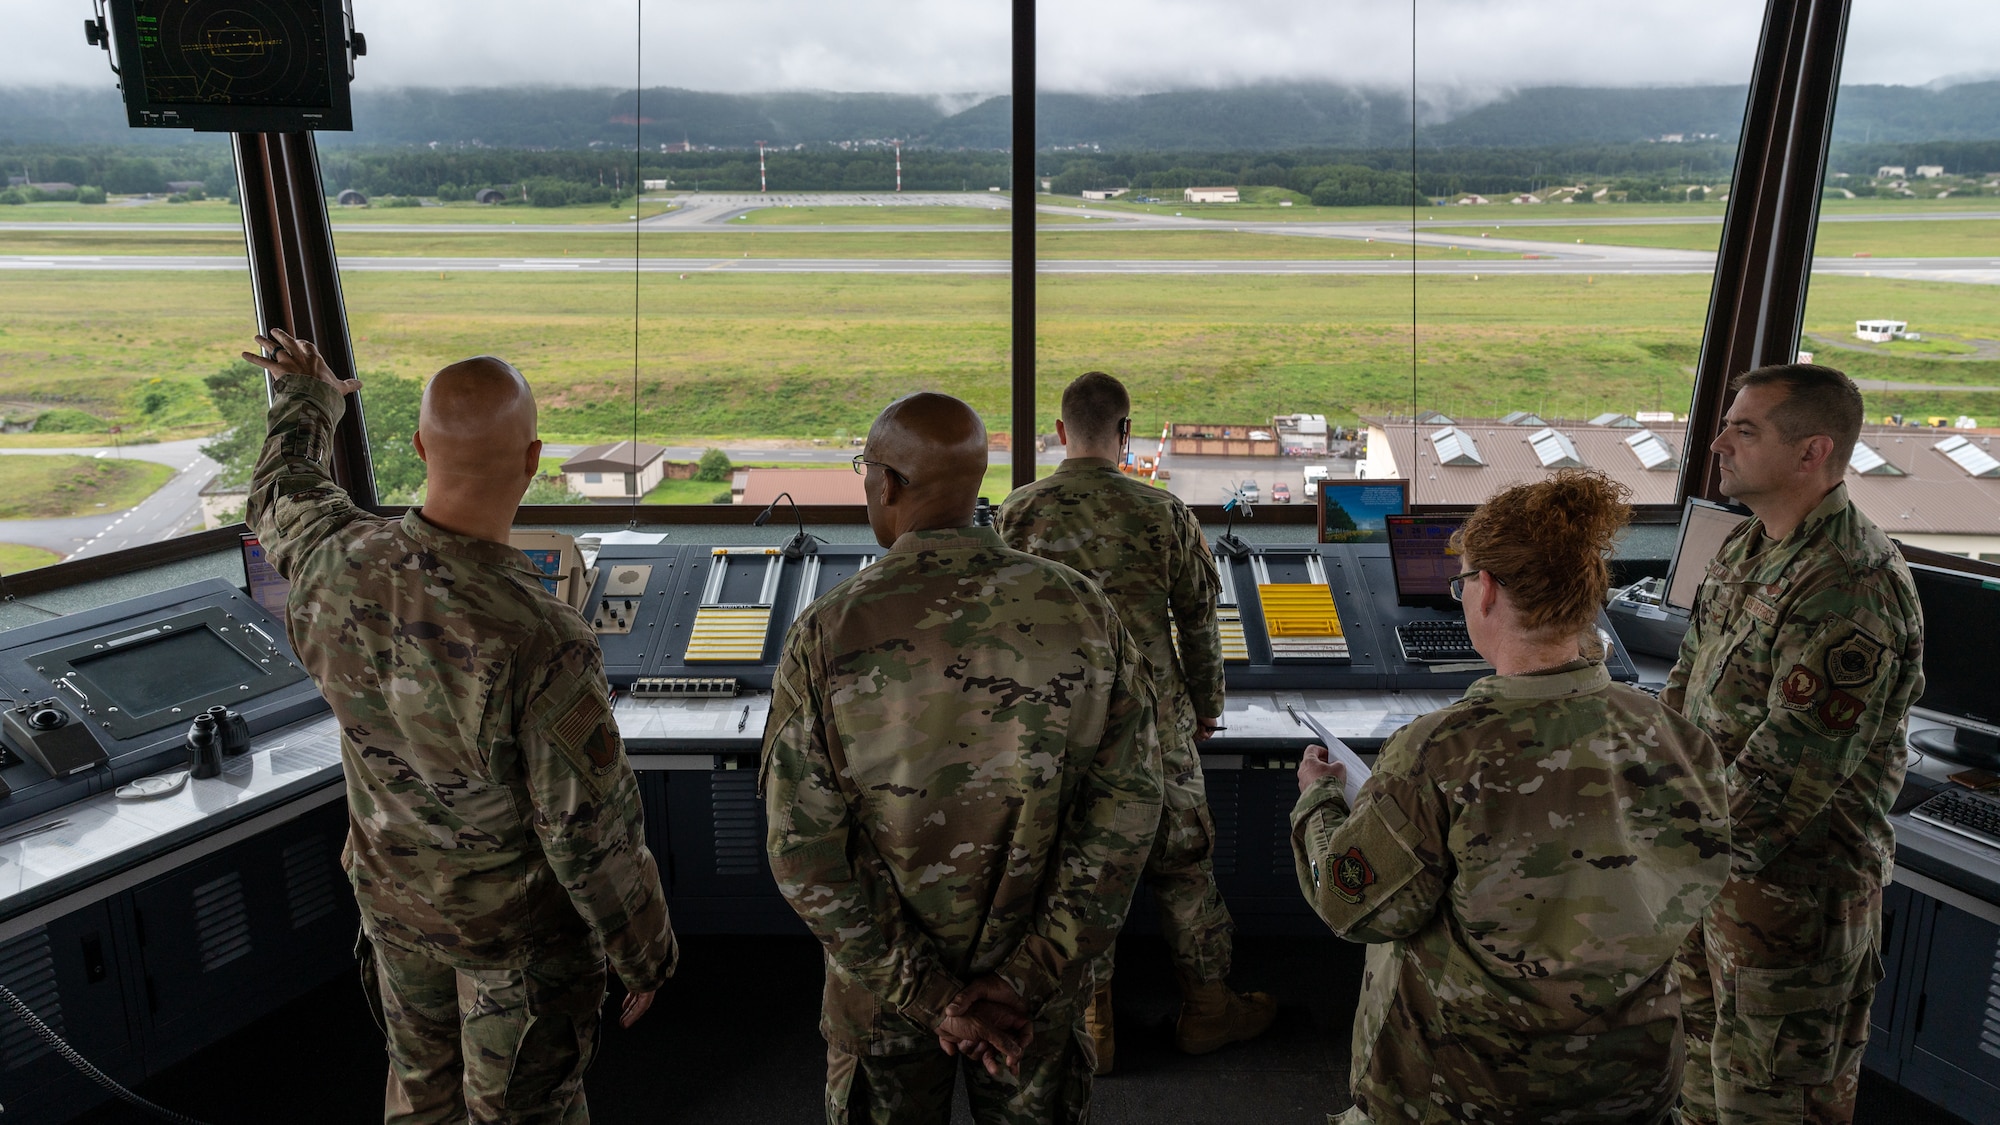 Airmen look at the flightline from the Air Traffic Control Tower